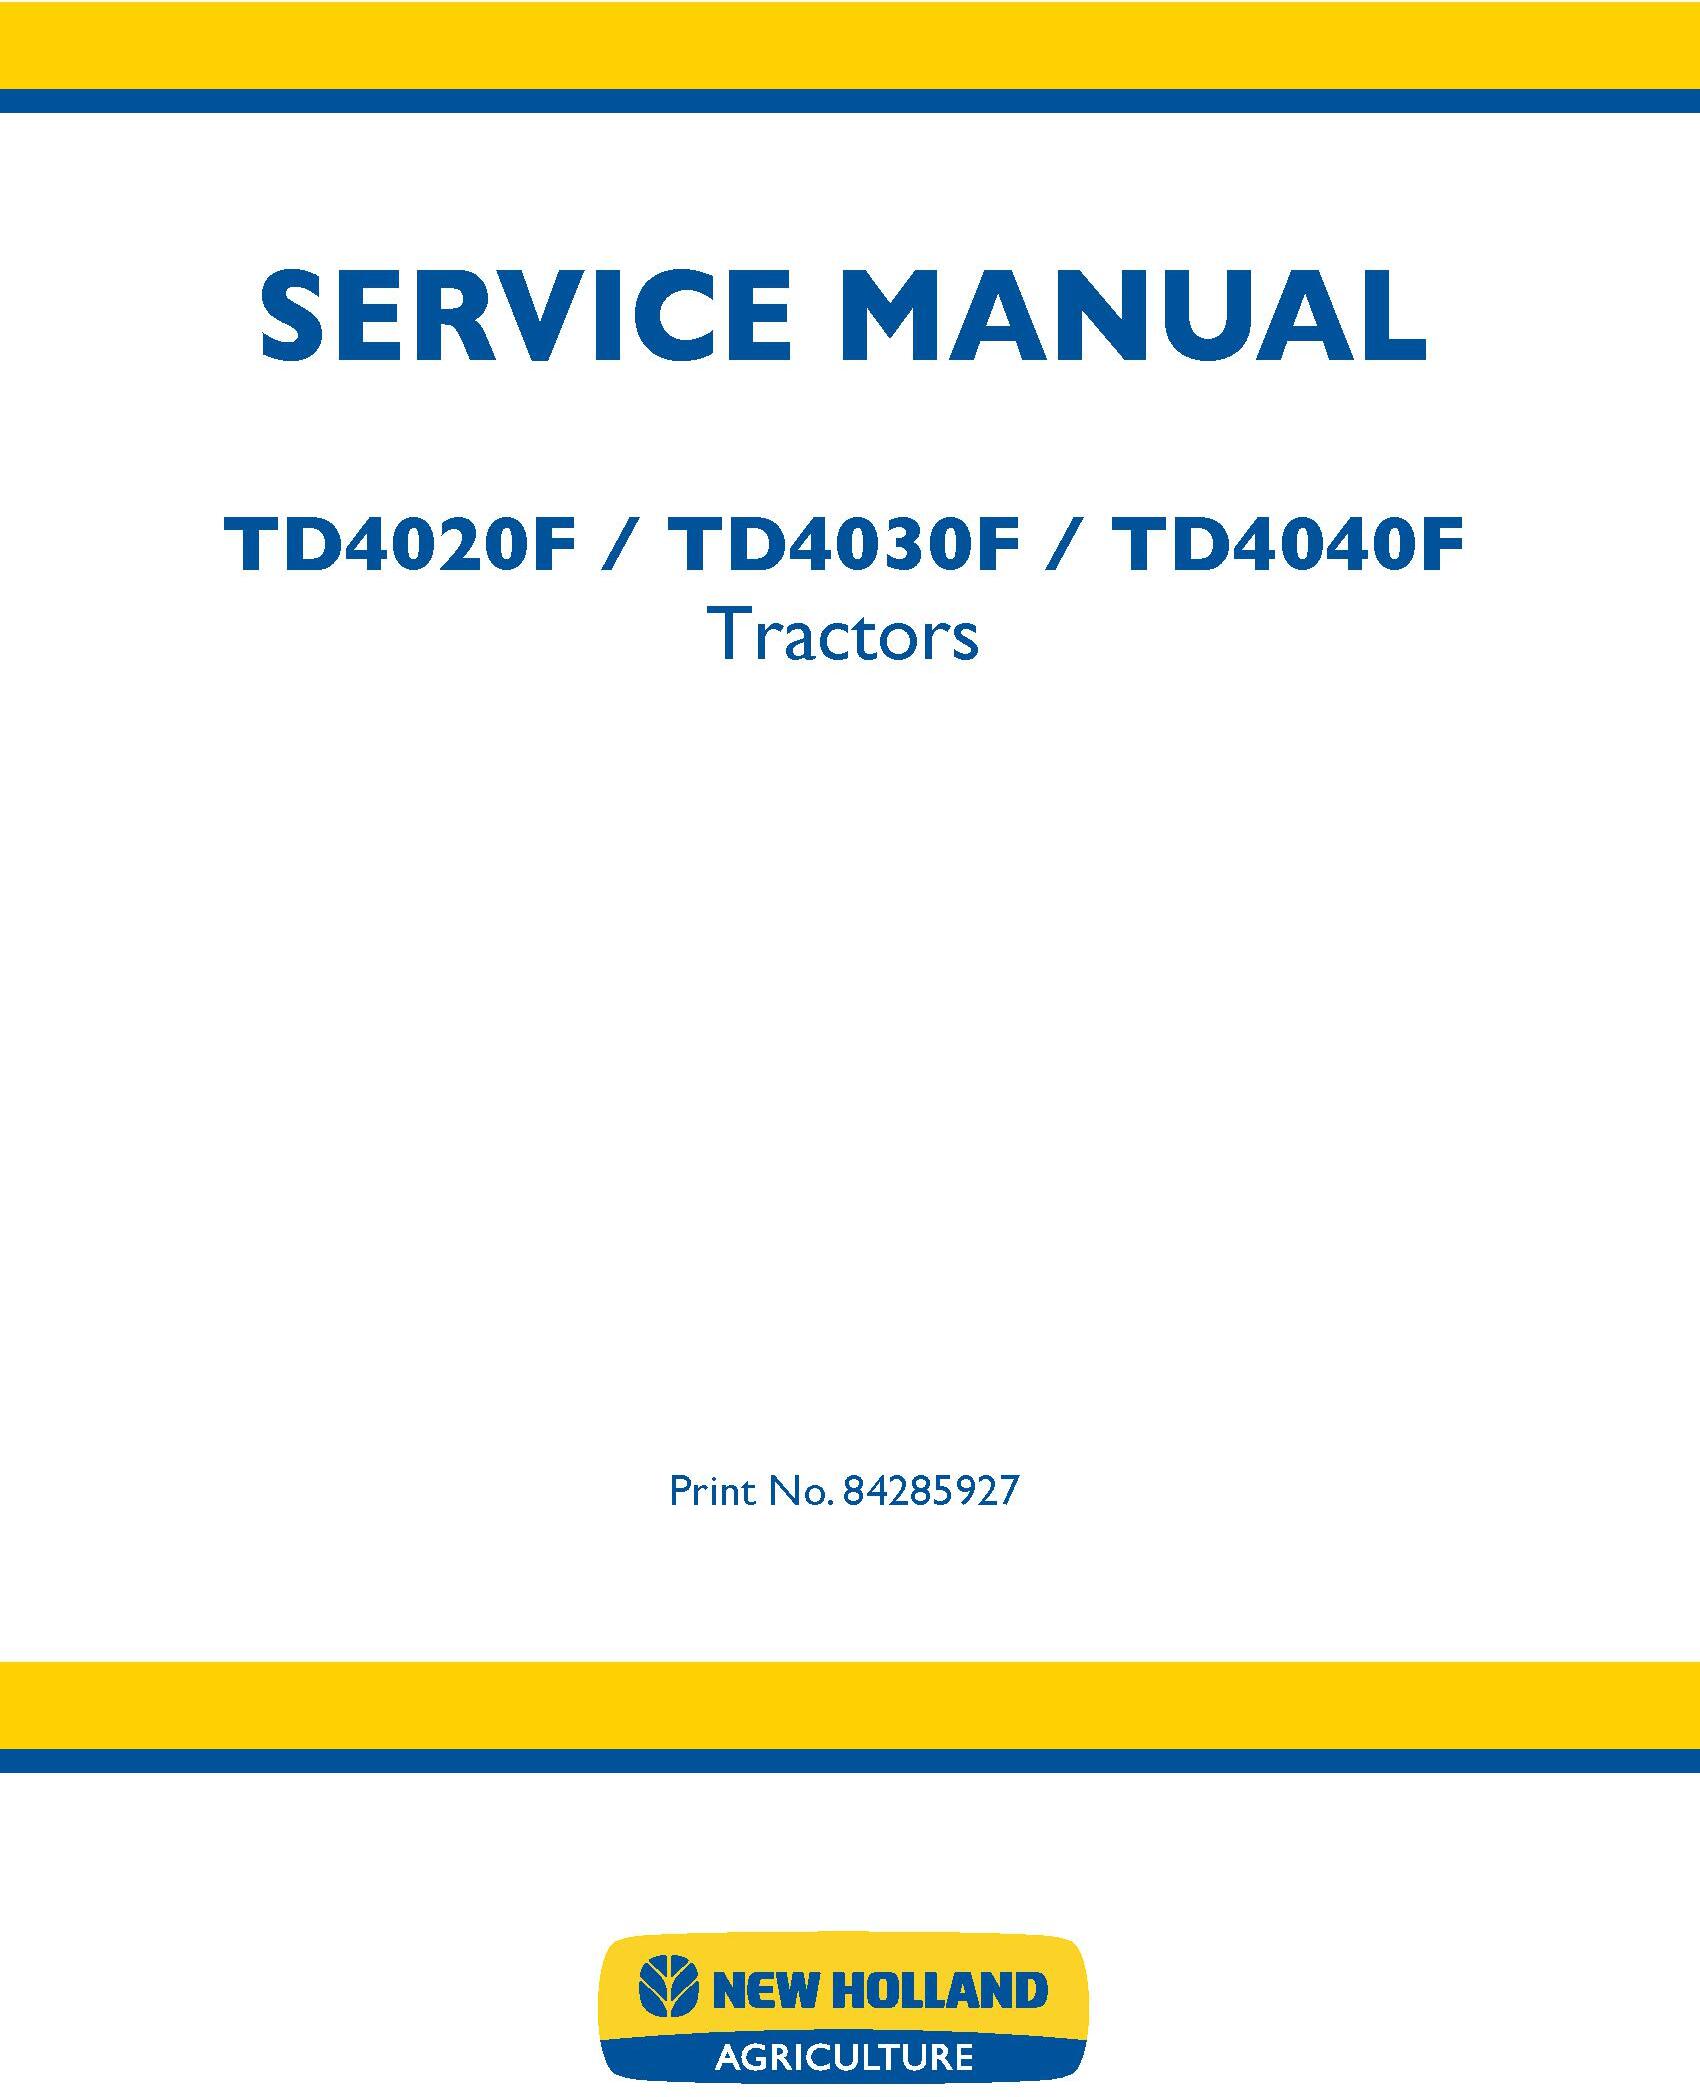 New Holland TD4020F, TD4030F, TD4040F Agricultural Tractor Service Manual (02/2010) - 19566